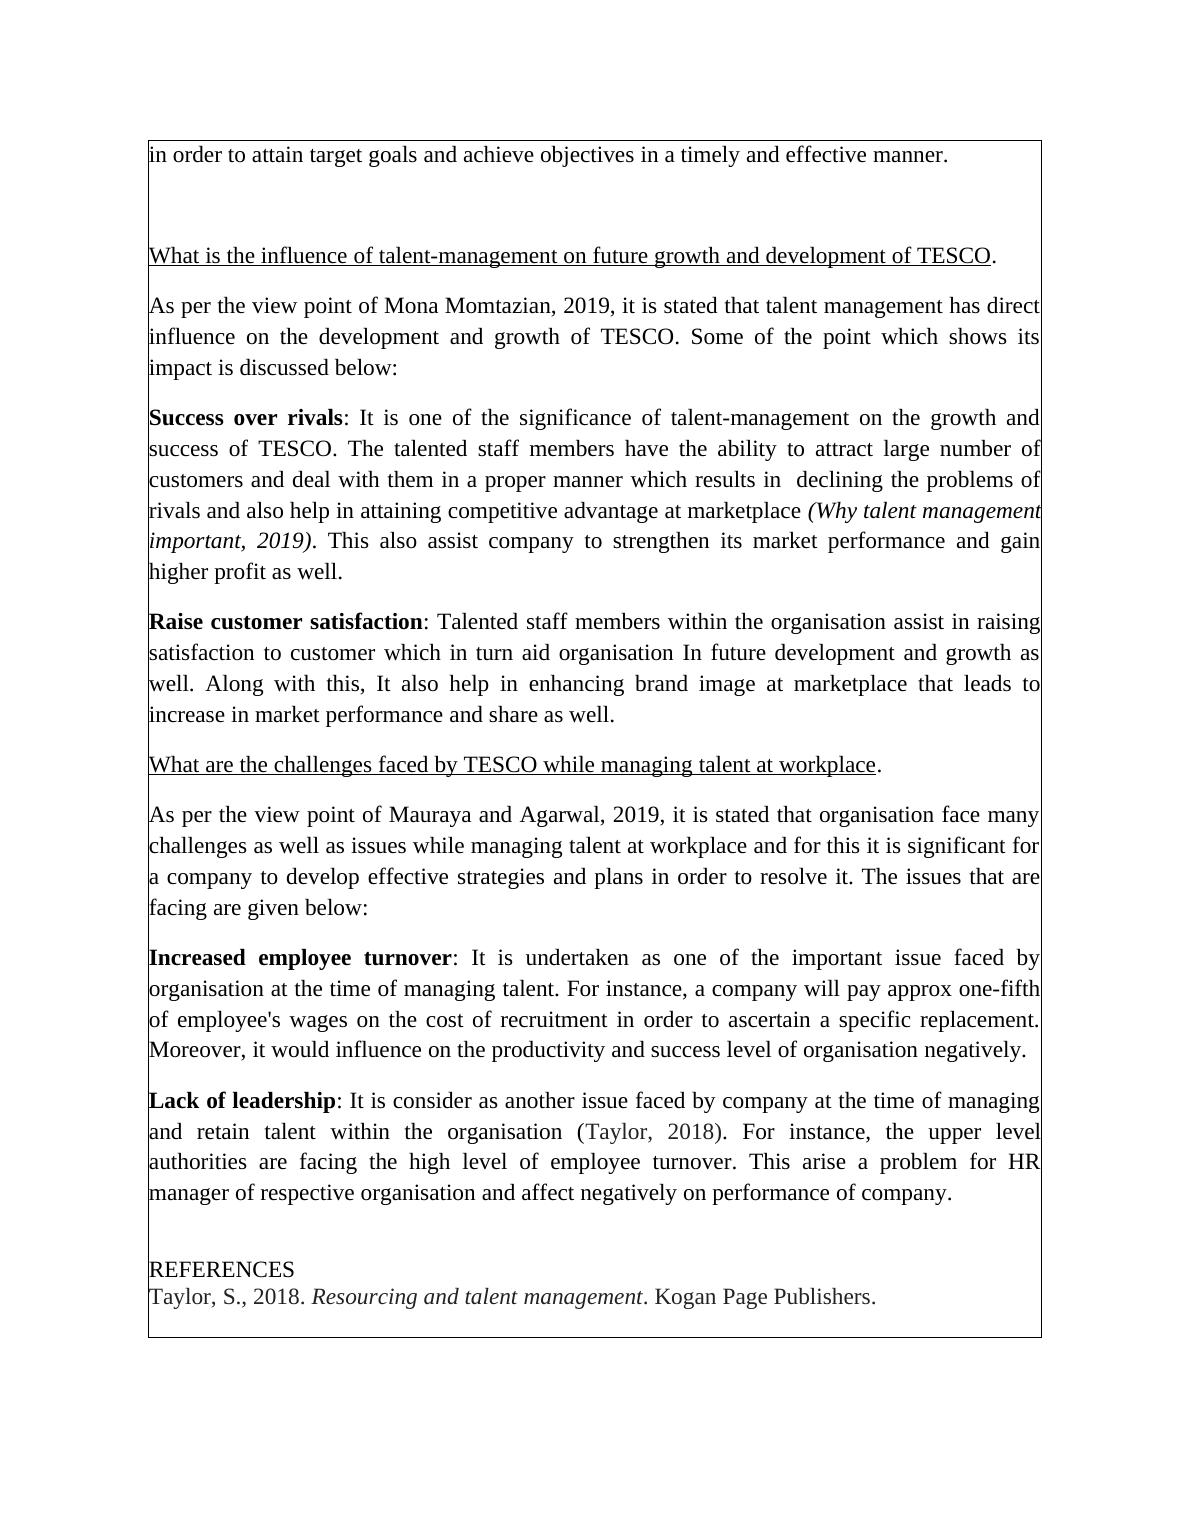 Role of Talent Management Framework and its Future Implications for Increasing Performance of Employees within an Organization - A Case Study on TESCO_6